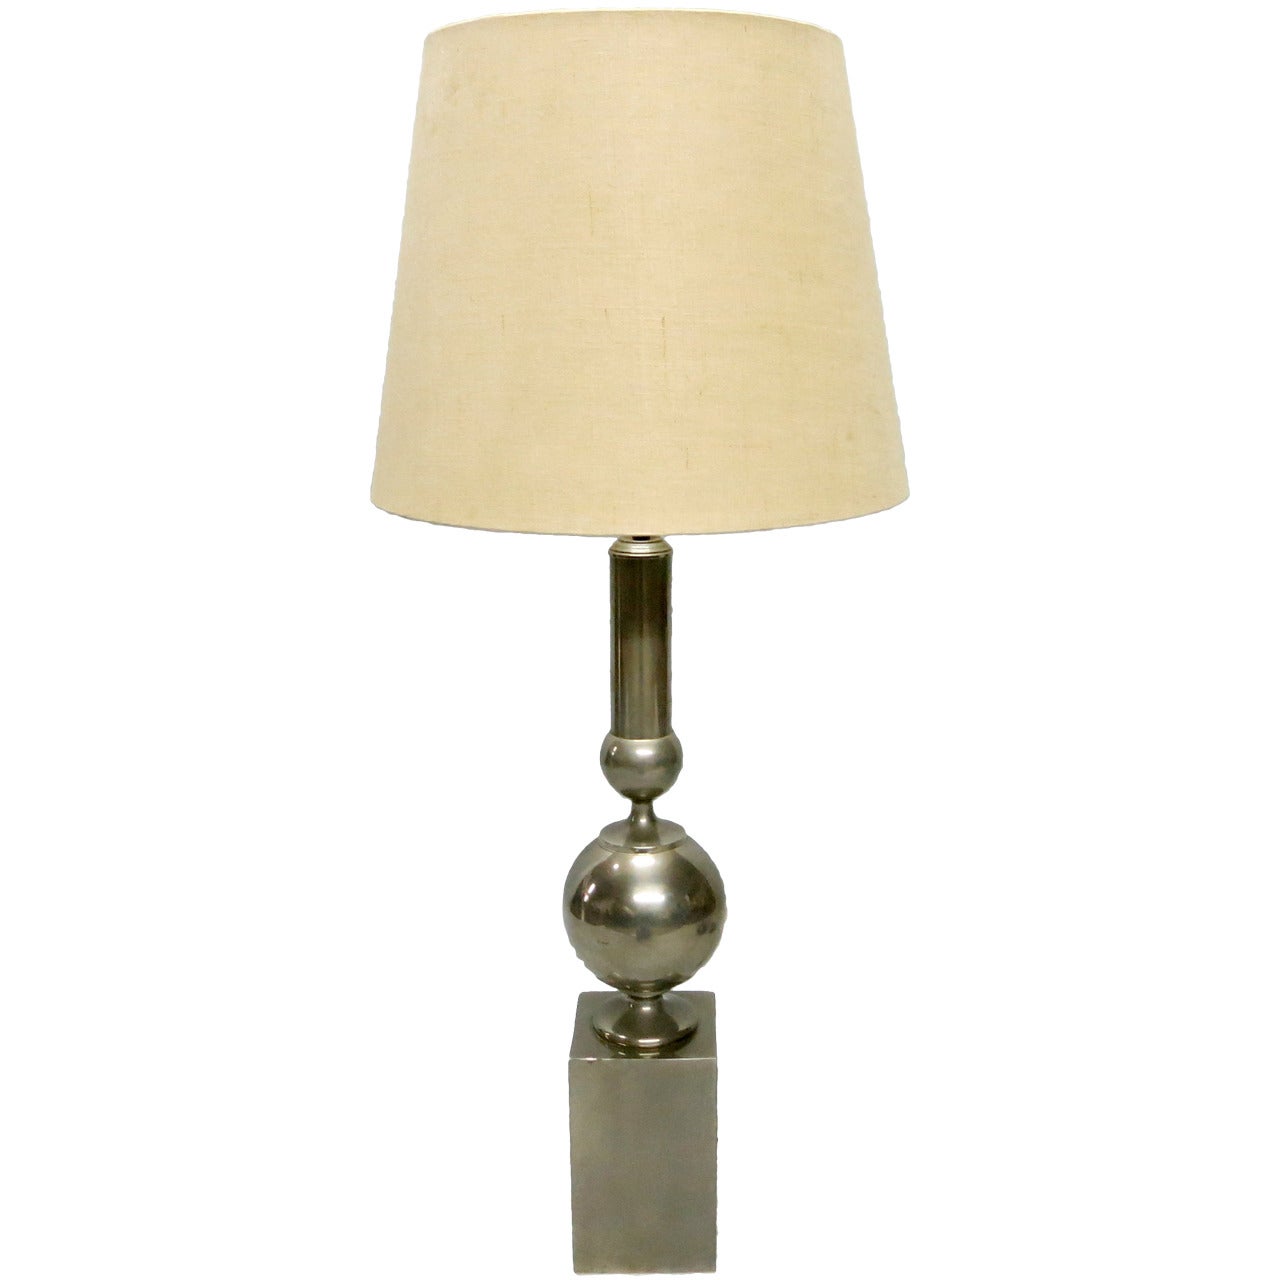 Single Tall Table Lamp by Philippe Barbier, Circa 1970 France